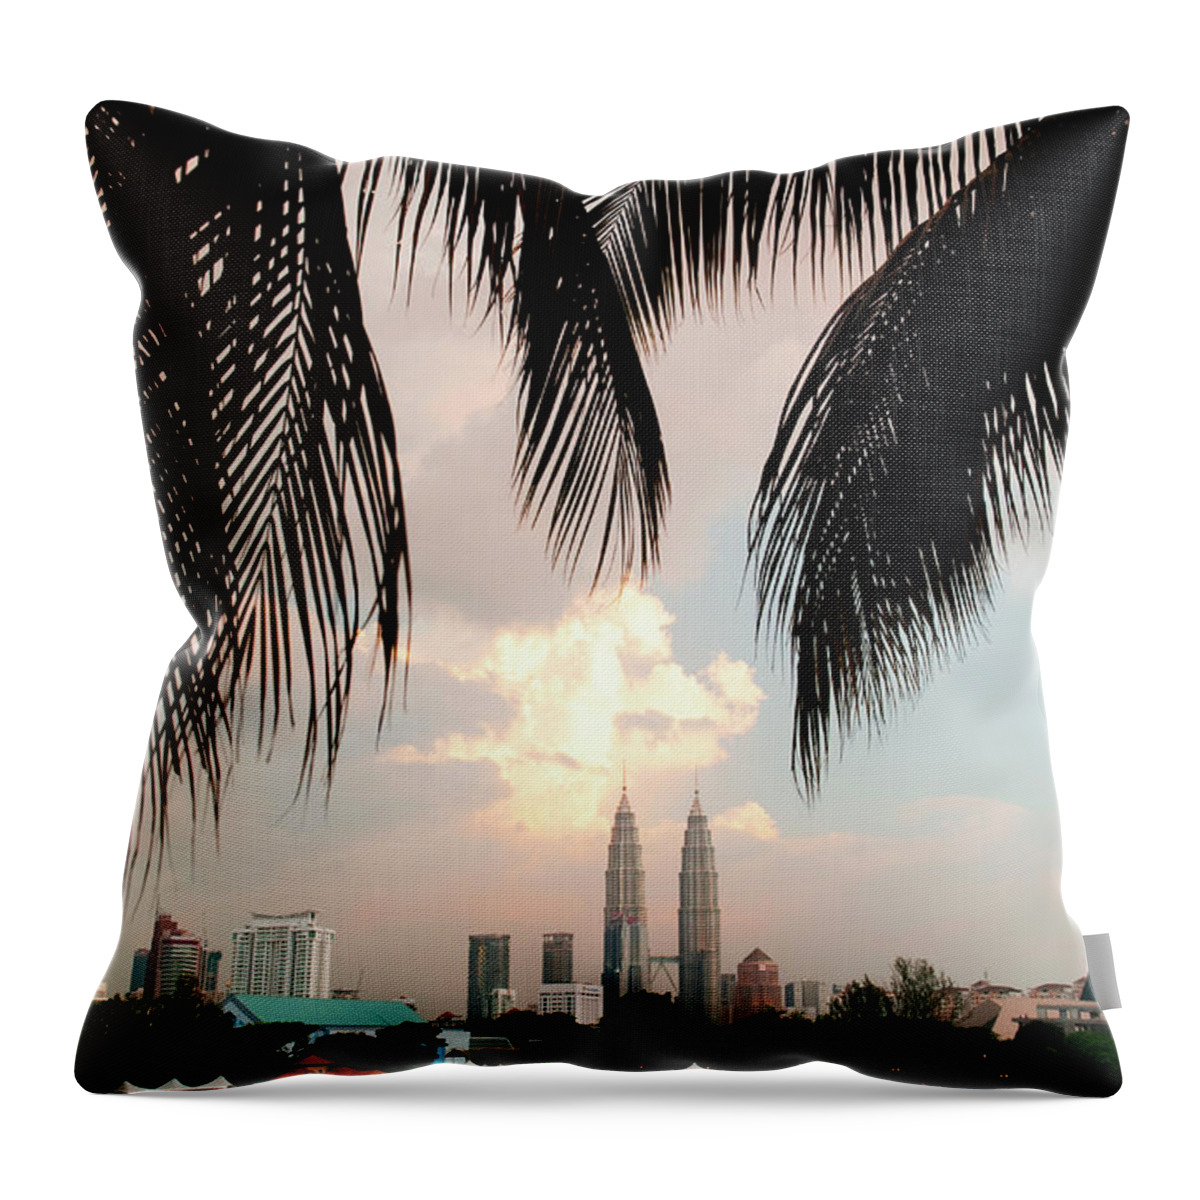 Southeast Asia Throw Pillow featuring the photograph Petronas Towers And Lake Titiwangsa by Anders Blomqvist